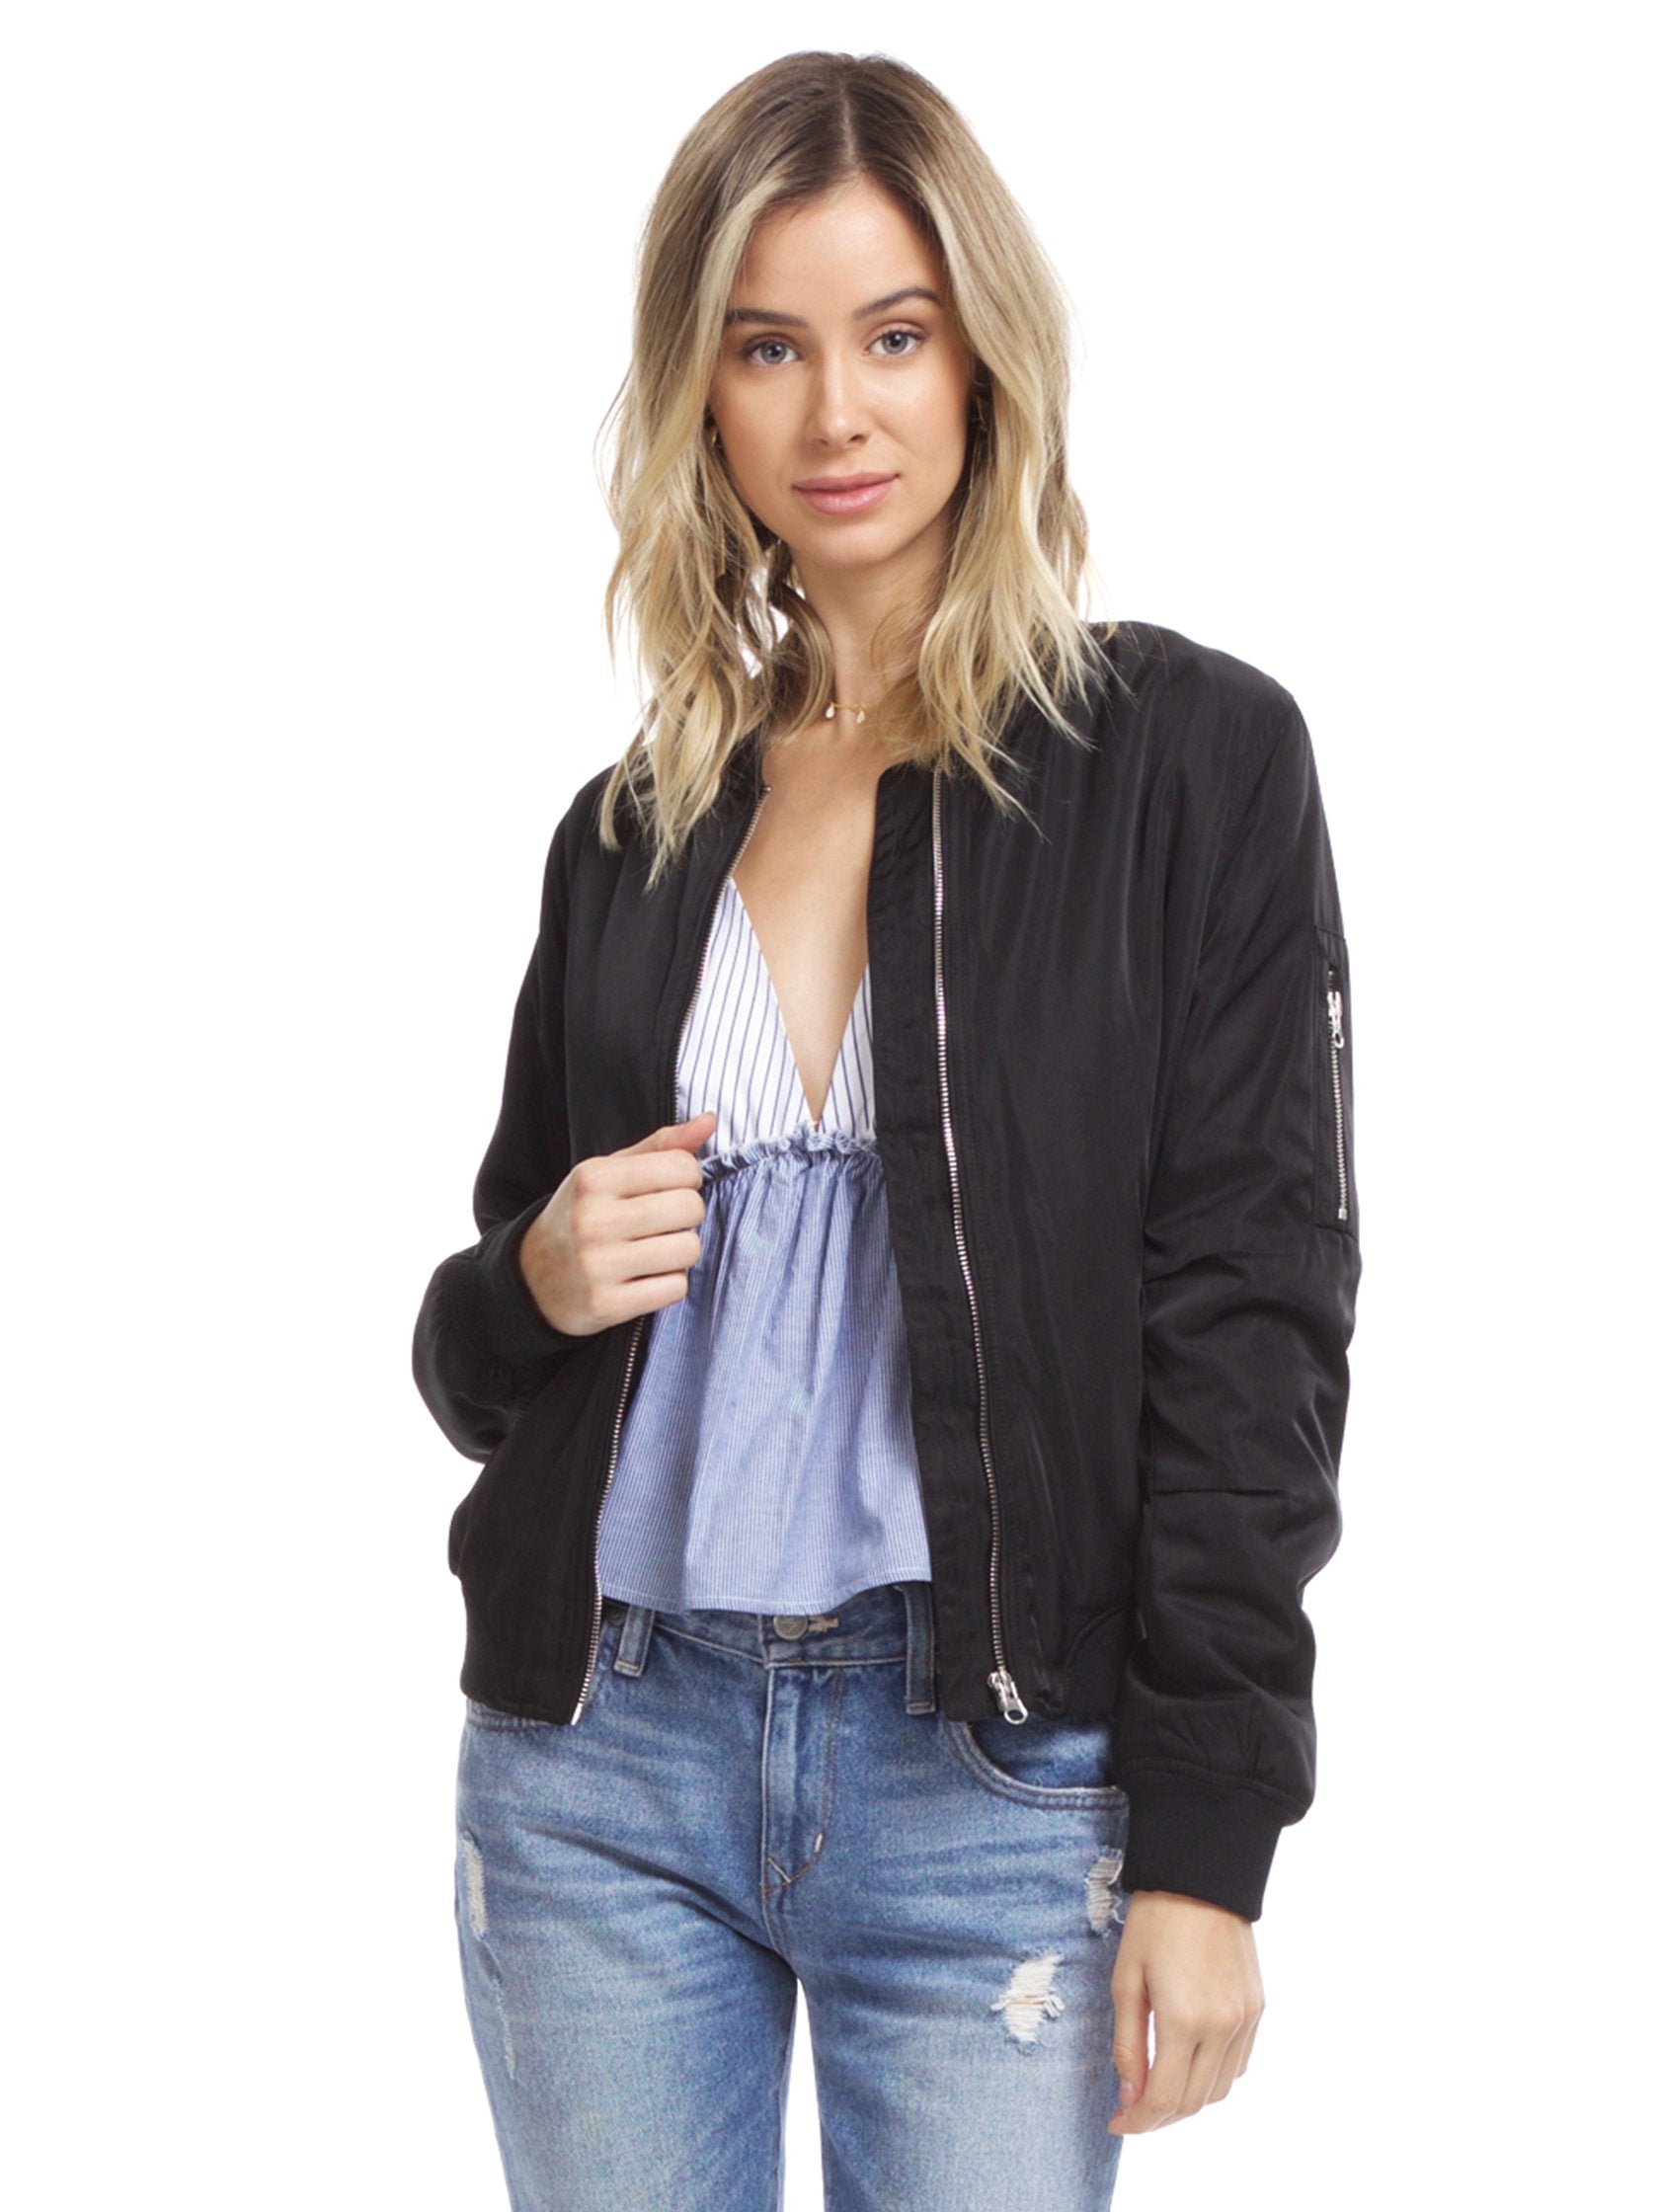 Woman wearing a jacket rental from Lush called Zip Up Bomber Jacket